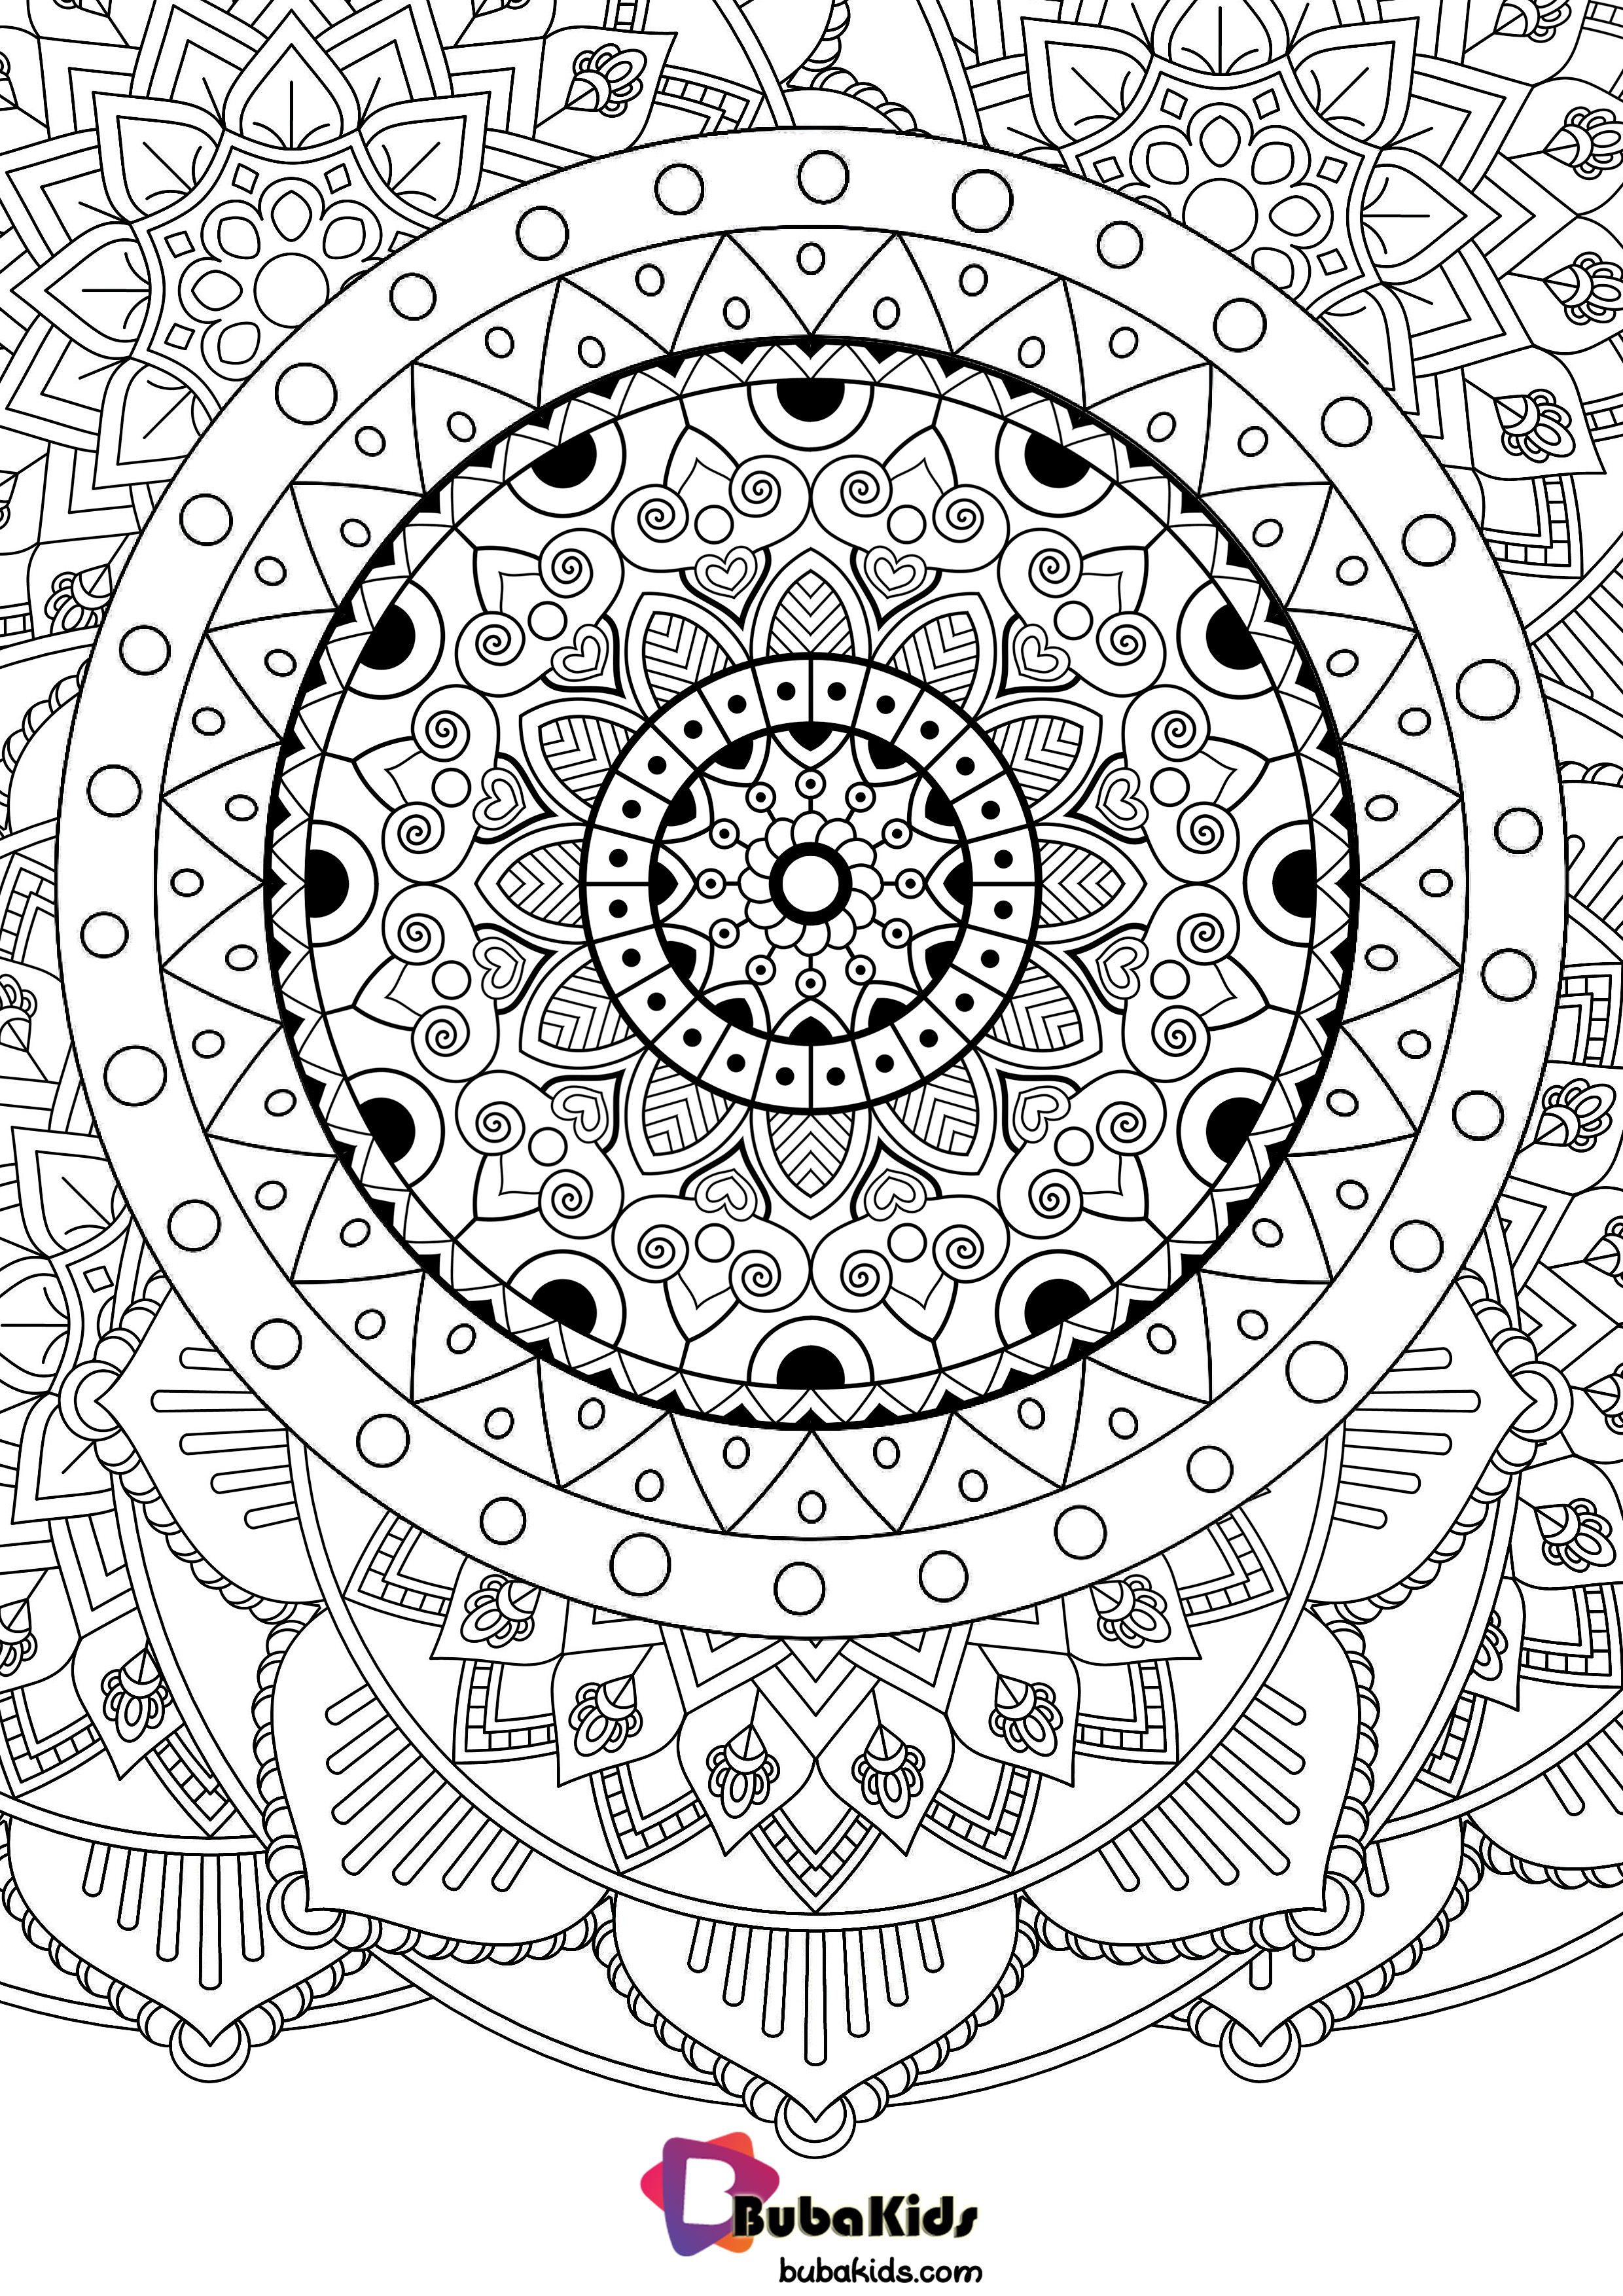 Go Let’s Go.. Free Mandala Coloring Page Wallpaper